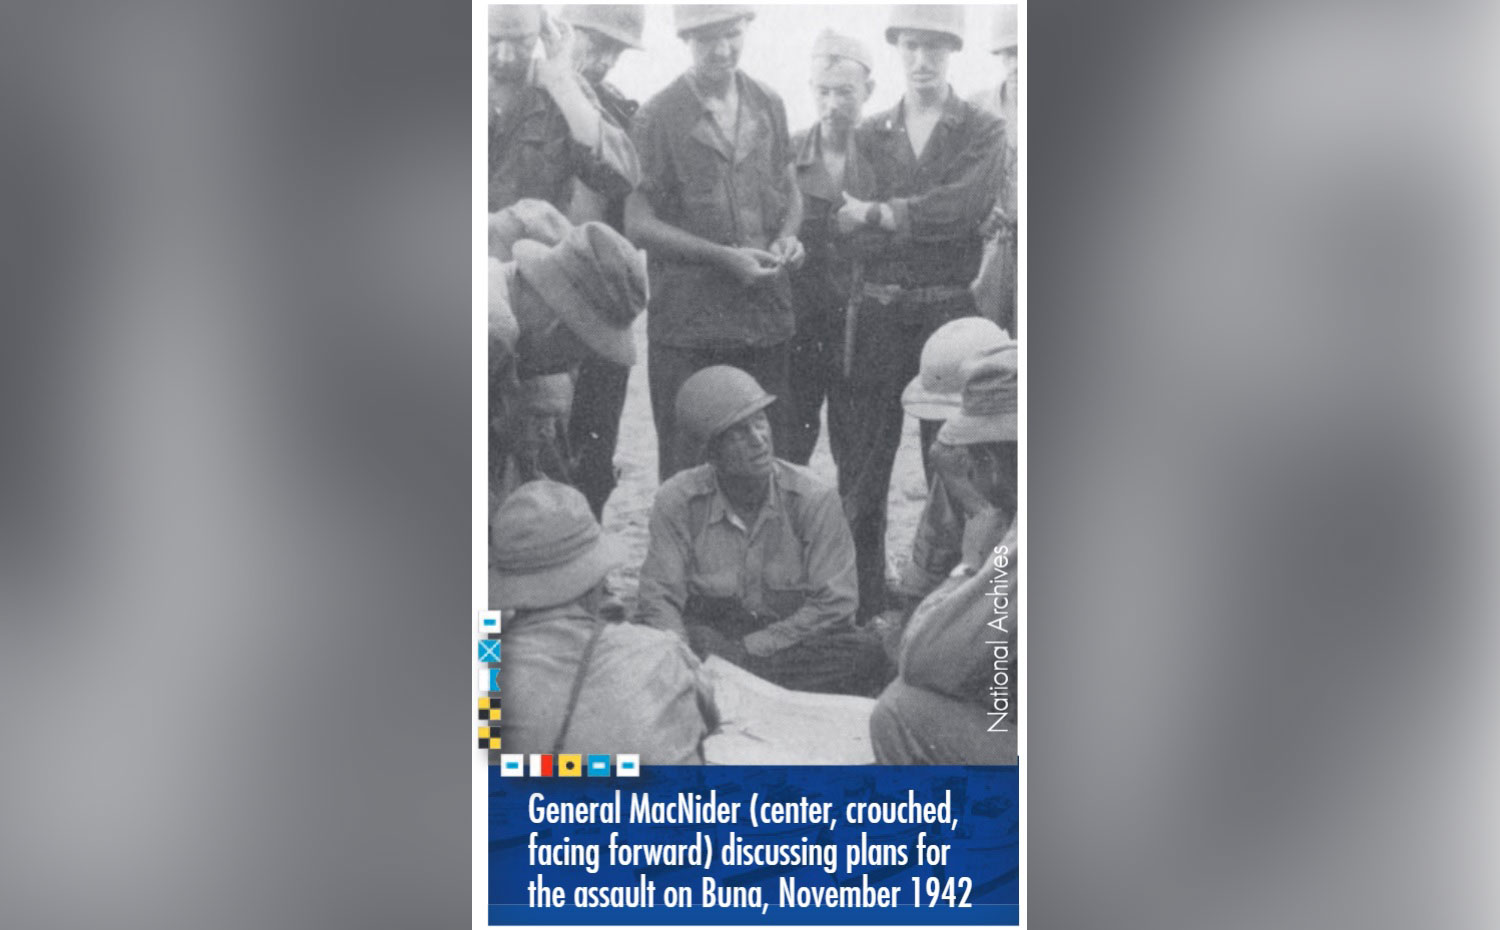 General MacNider (center, crouched, facing foward) discussing plans for the assult on Buna, November 1942. Photo from the National Archives.